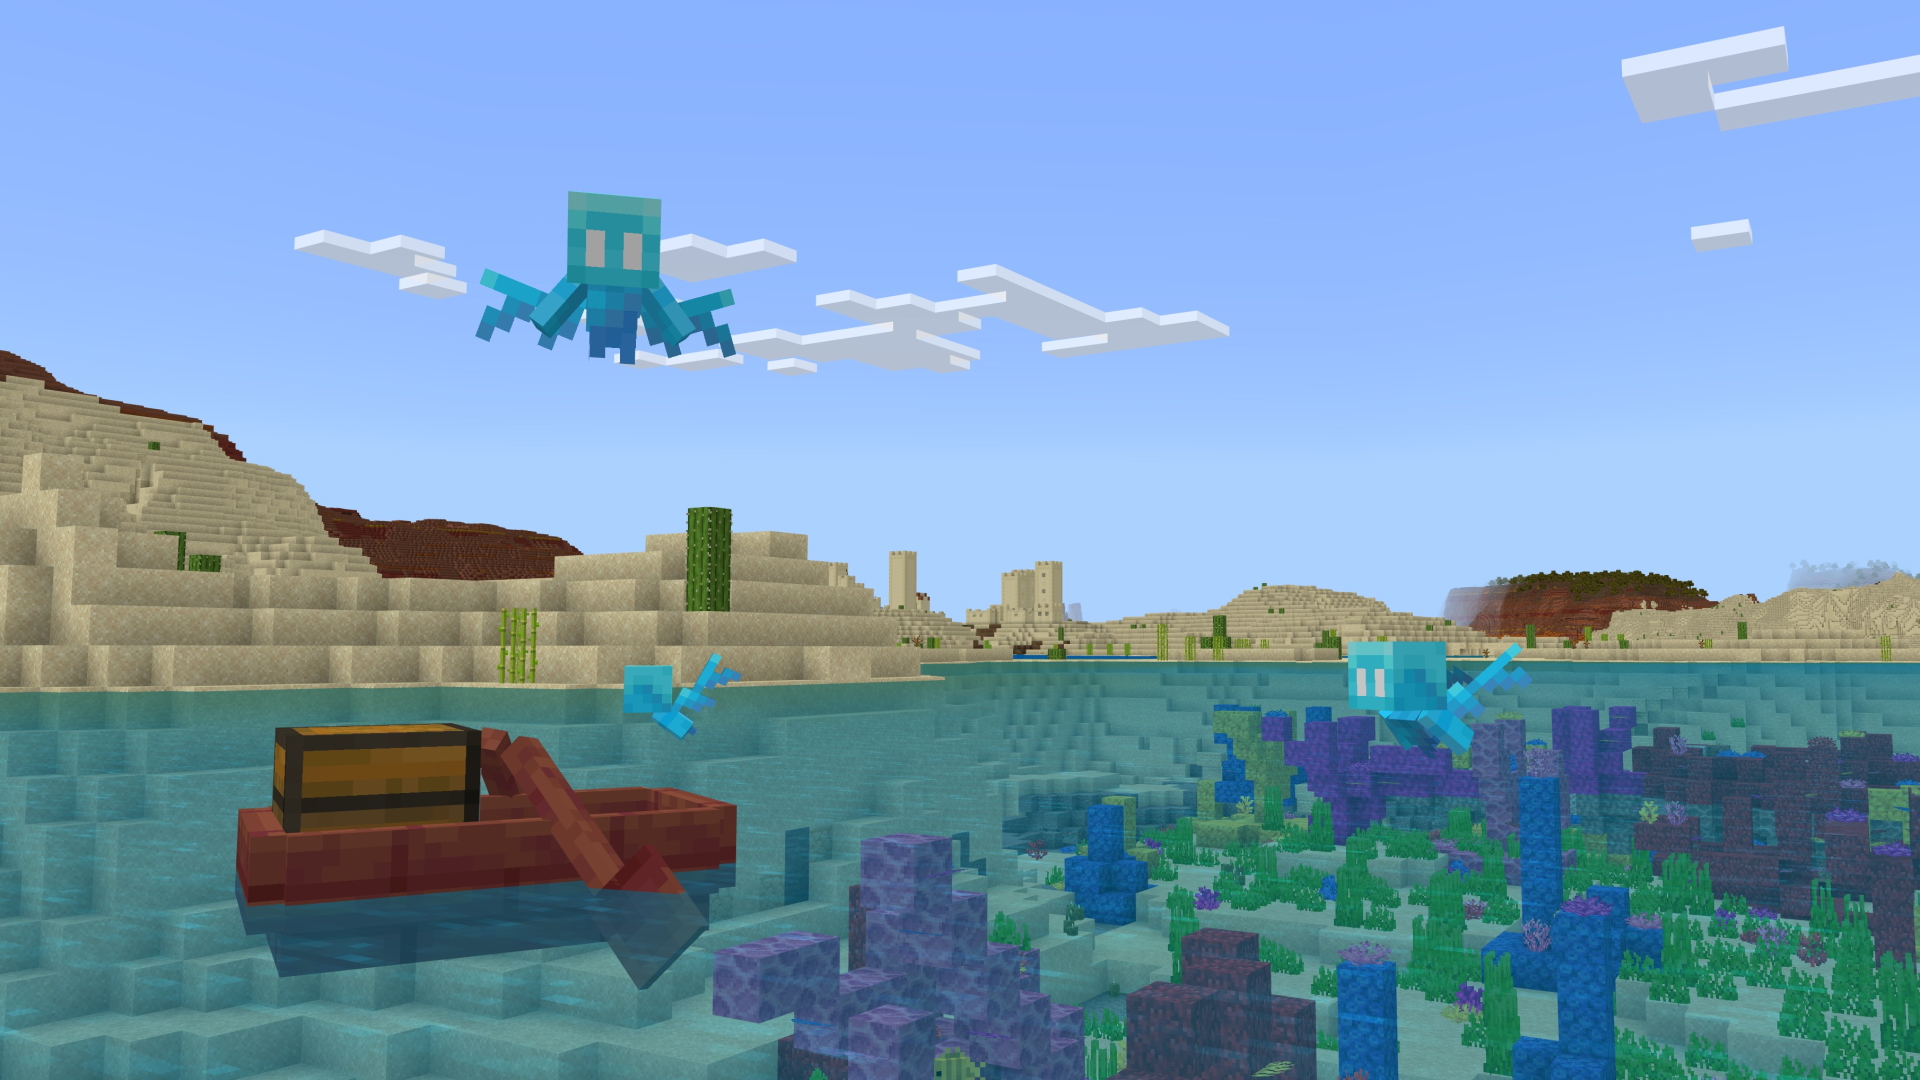 Download Minecraft PE 1.20.20.23 APK Free: Trails and Tales